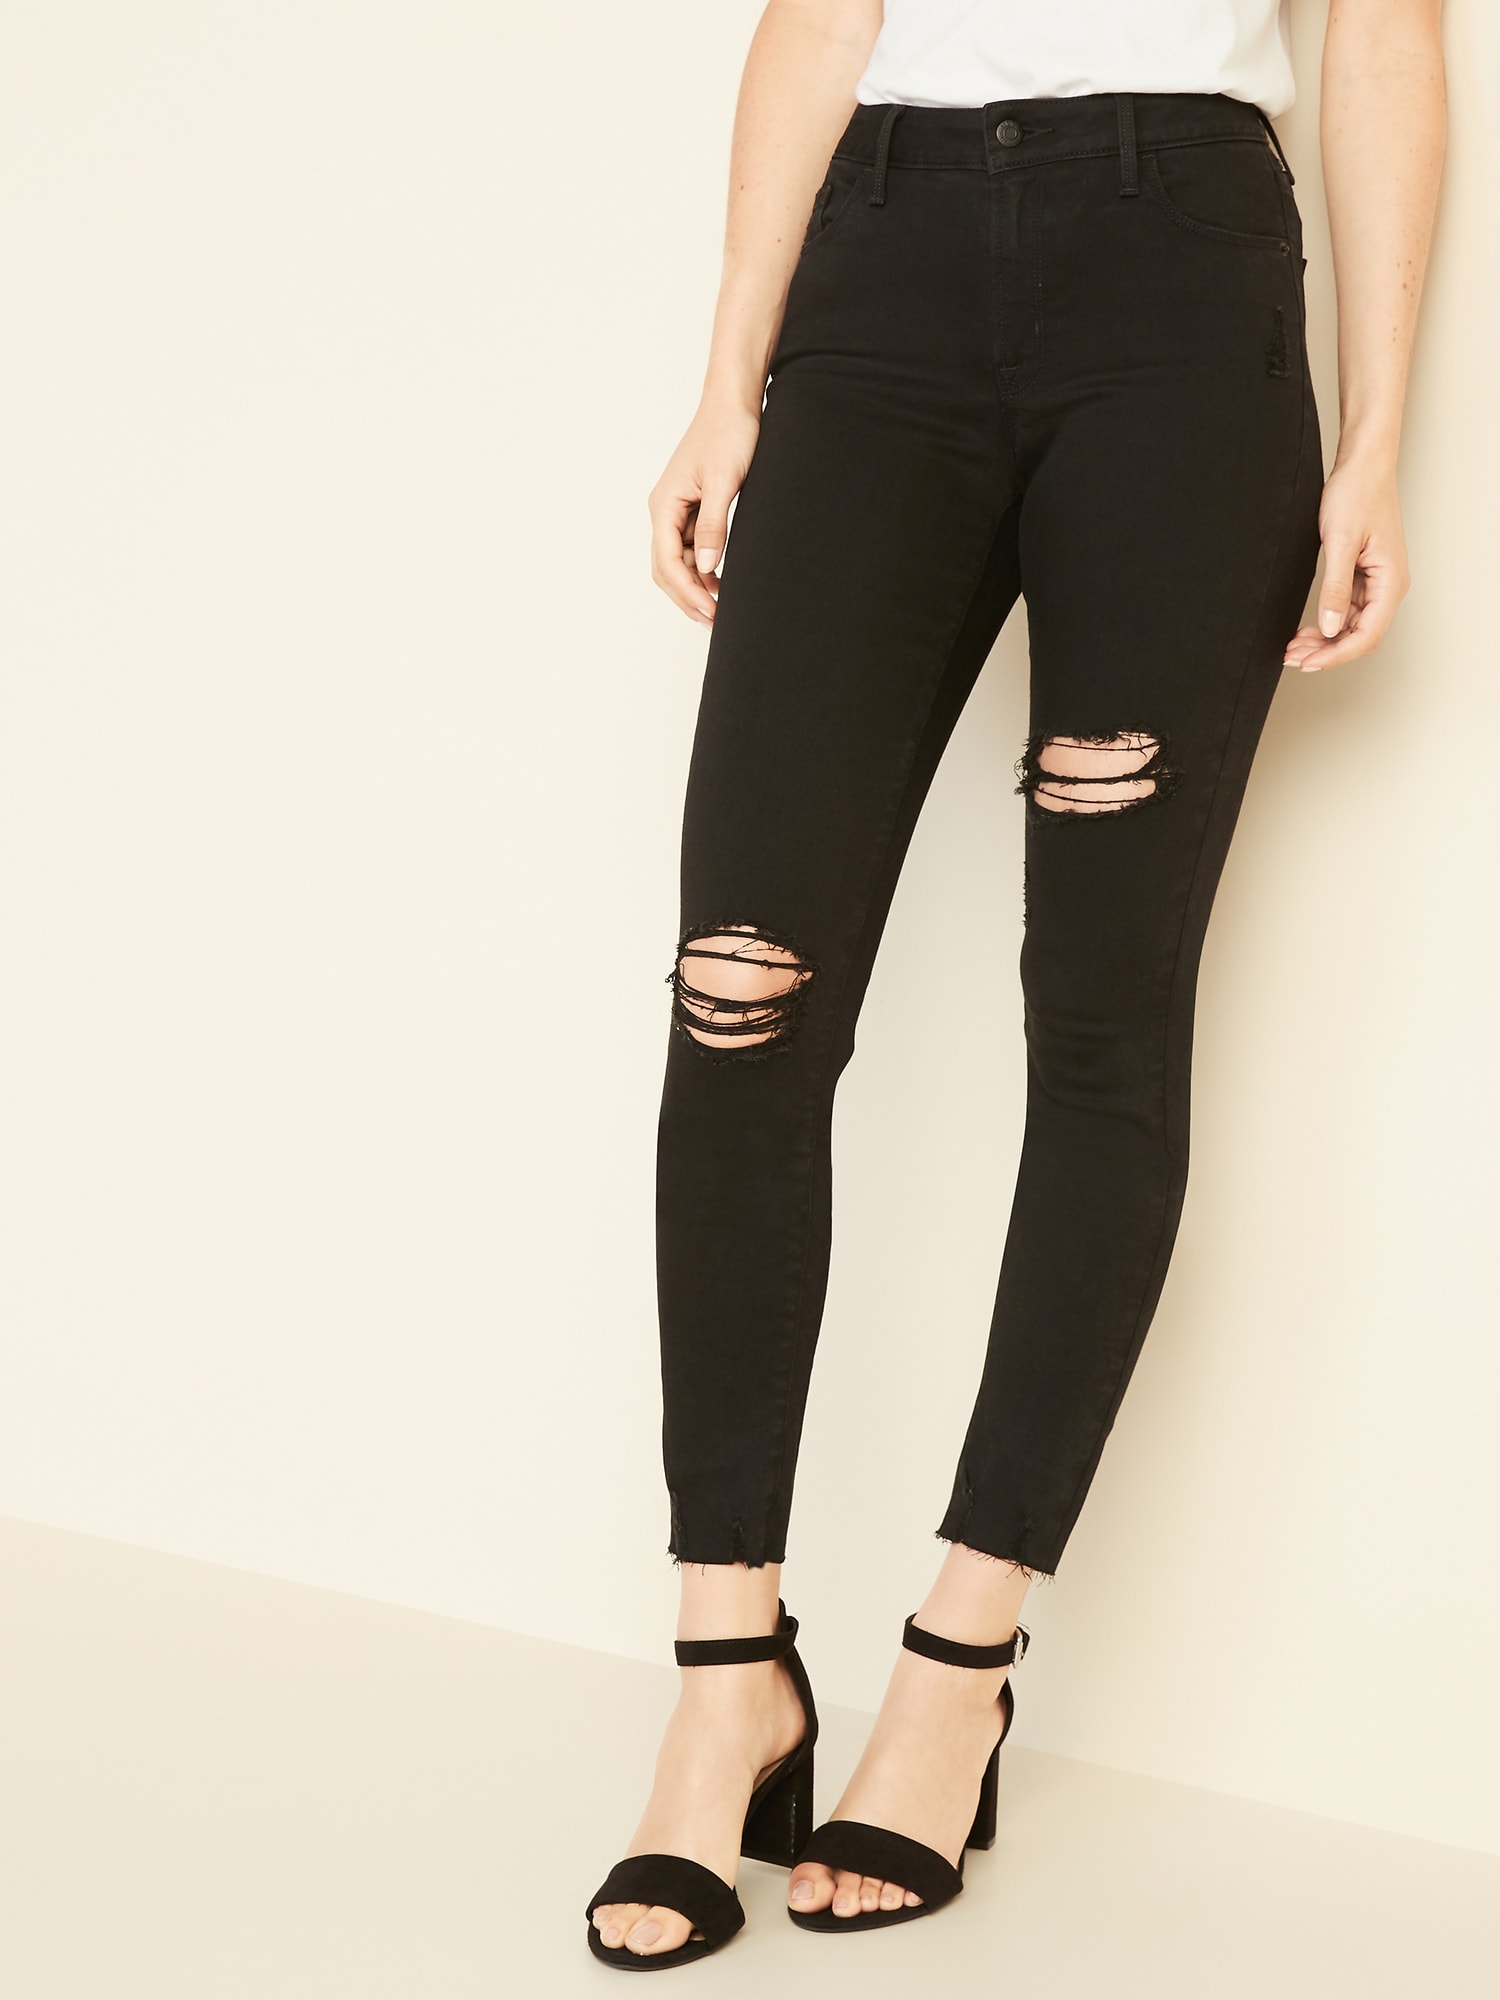 old navy high rise black jeans